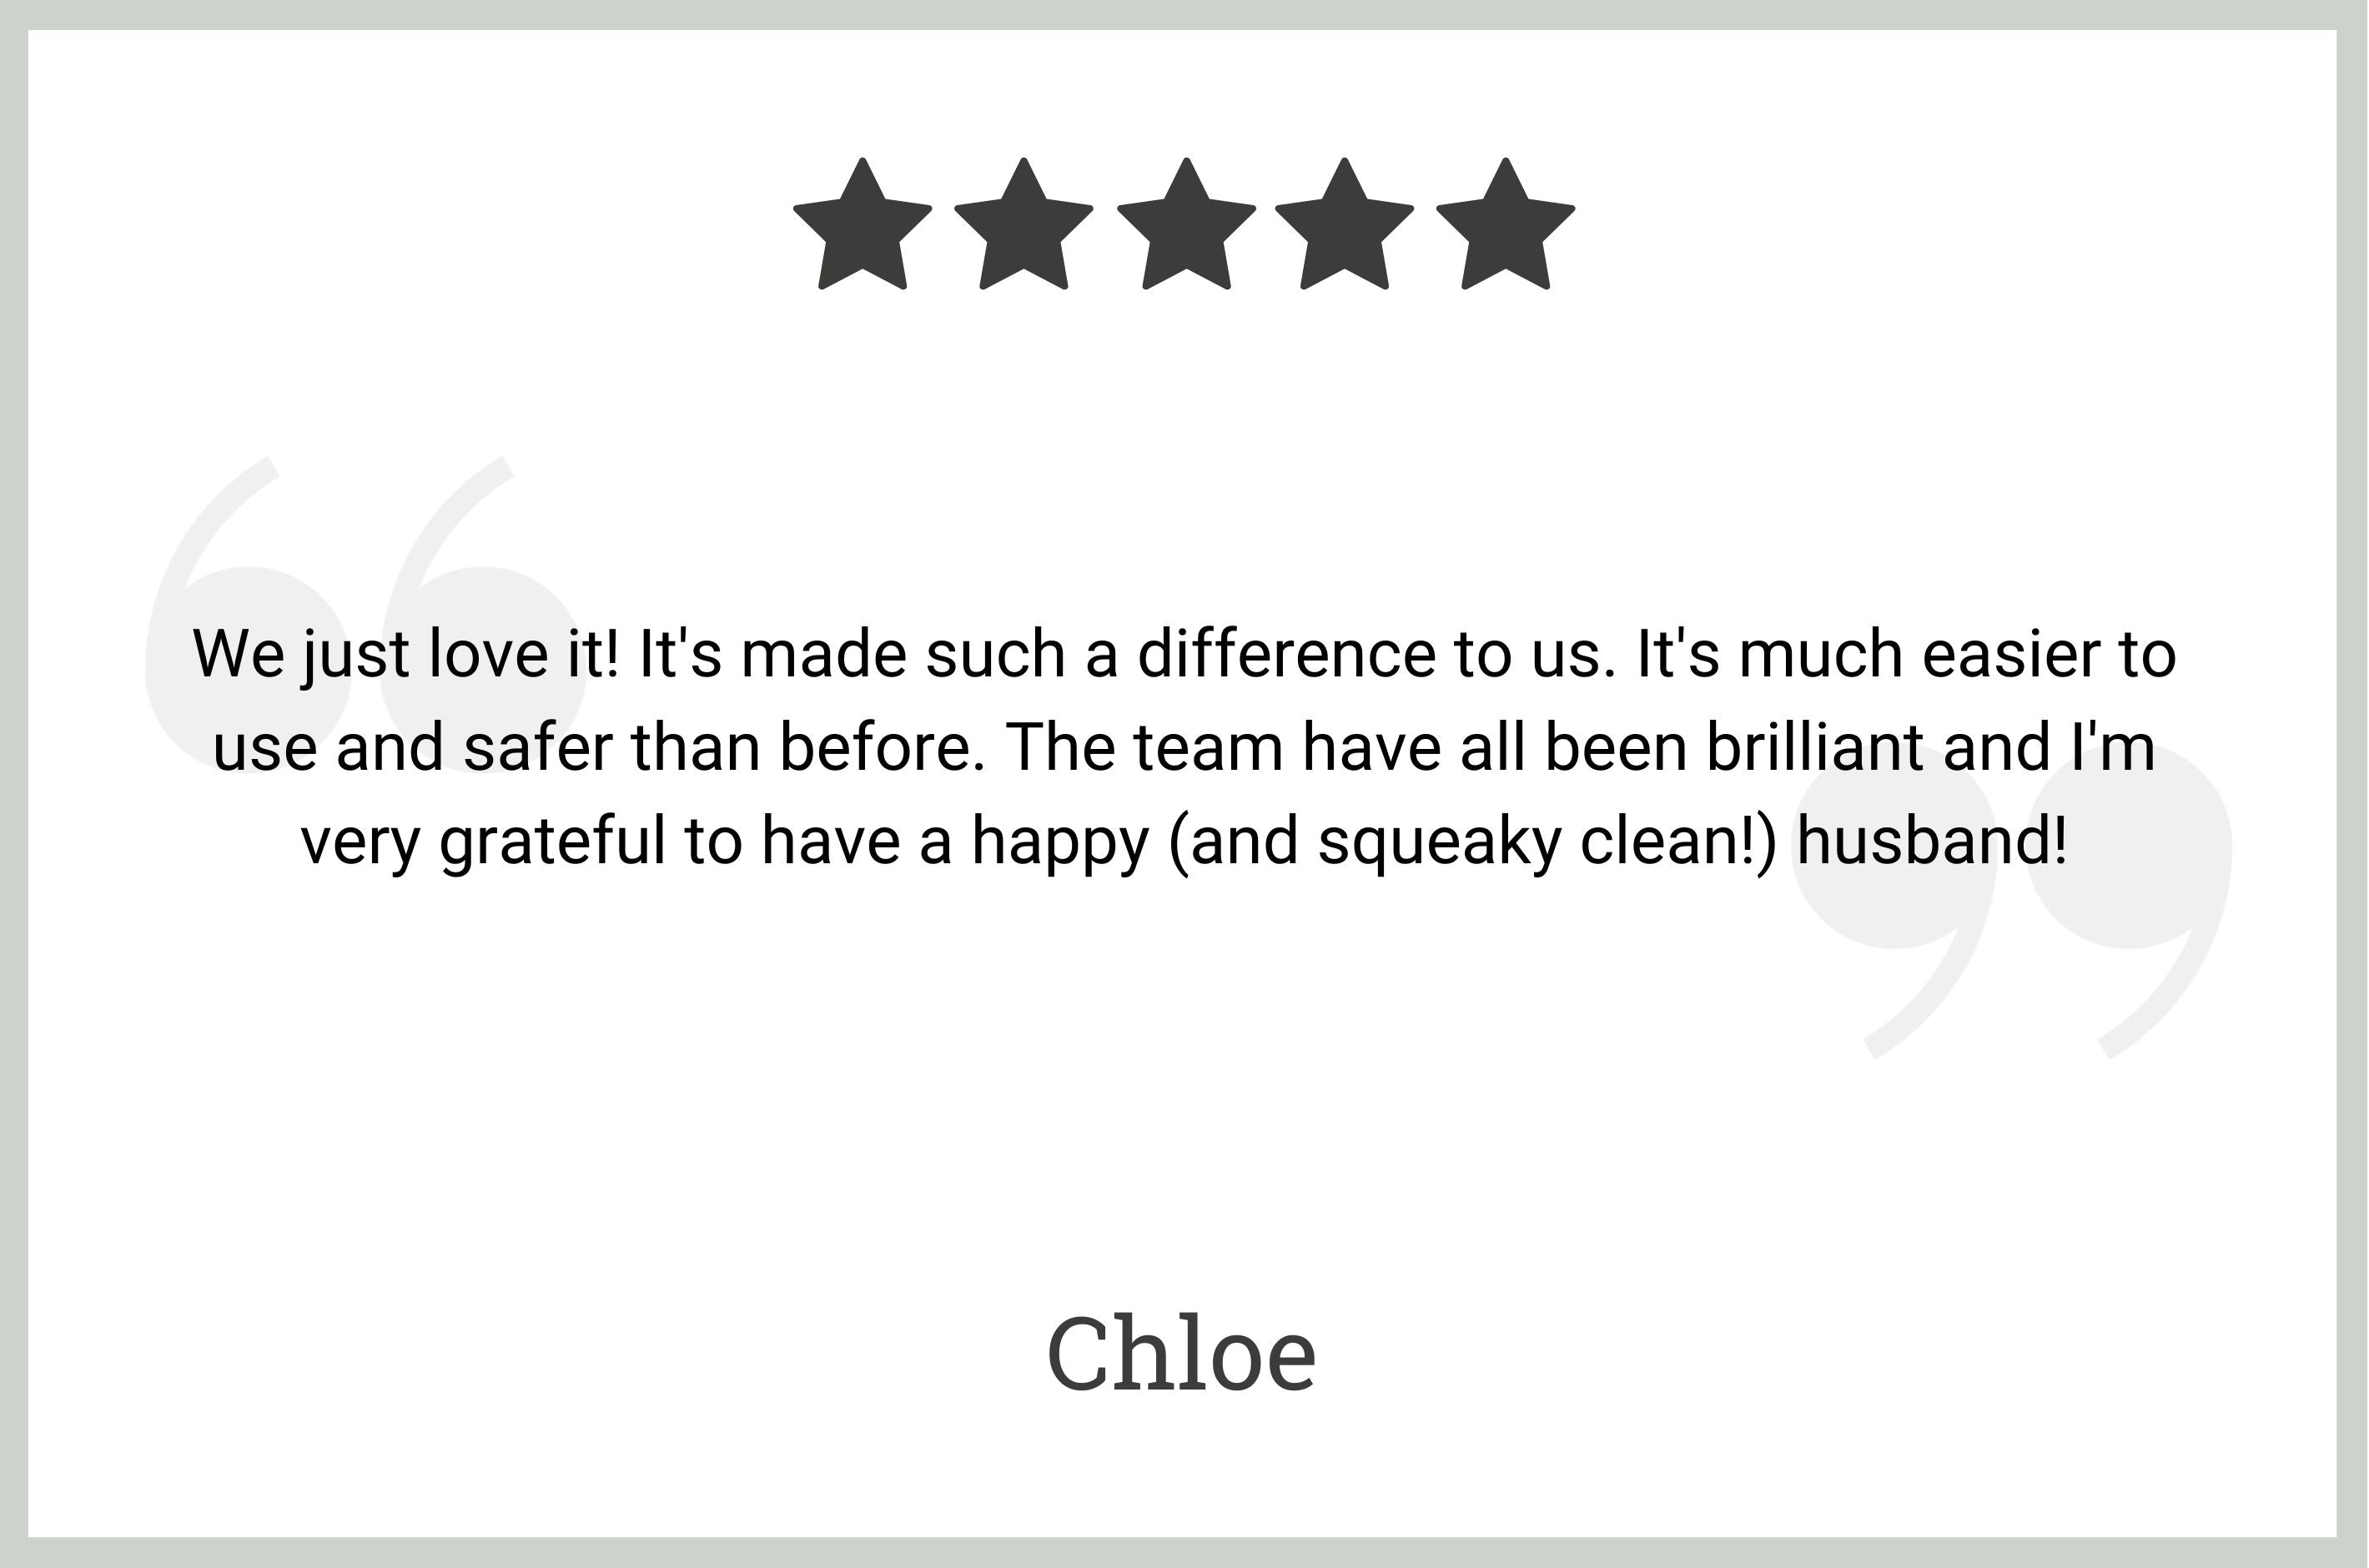 5 star review by Chloe